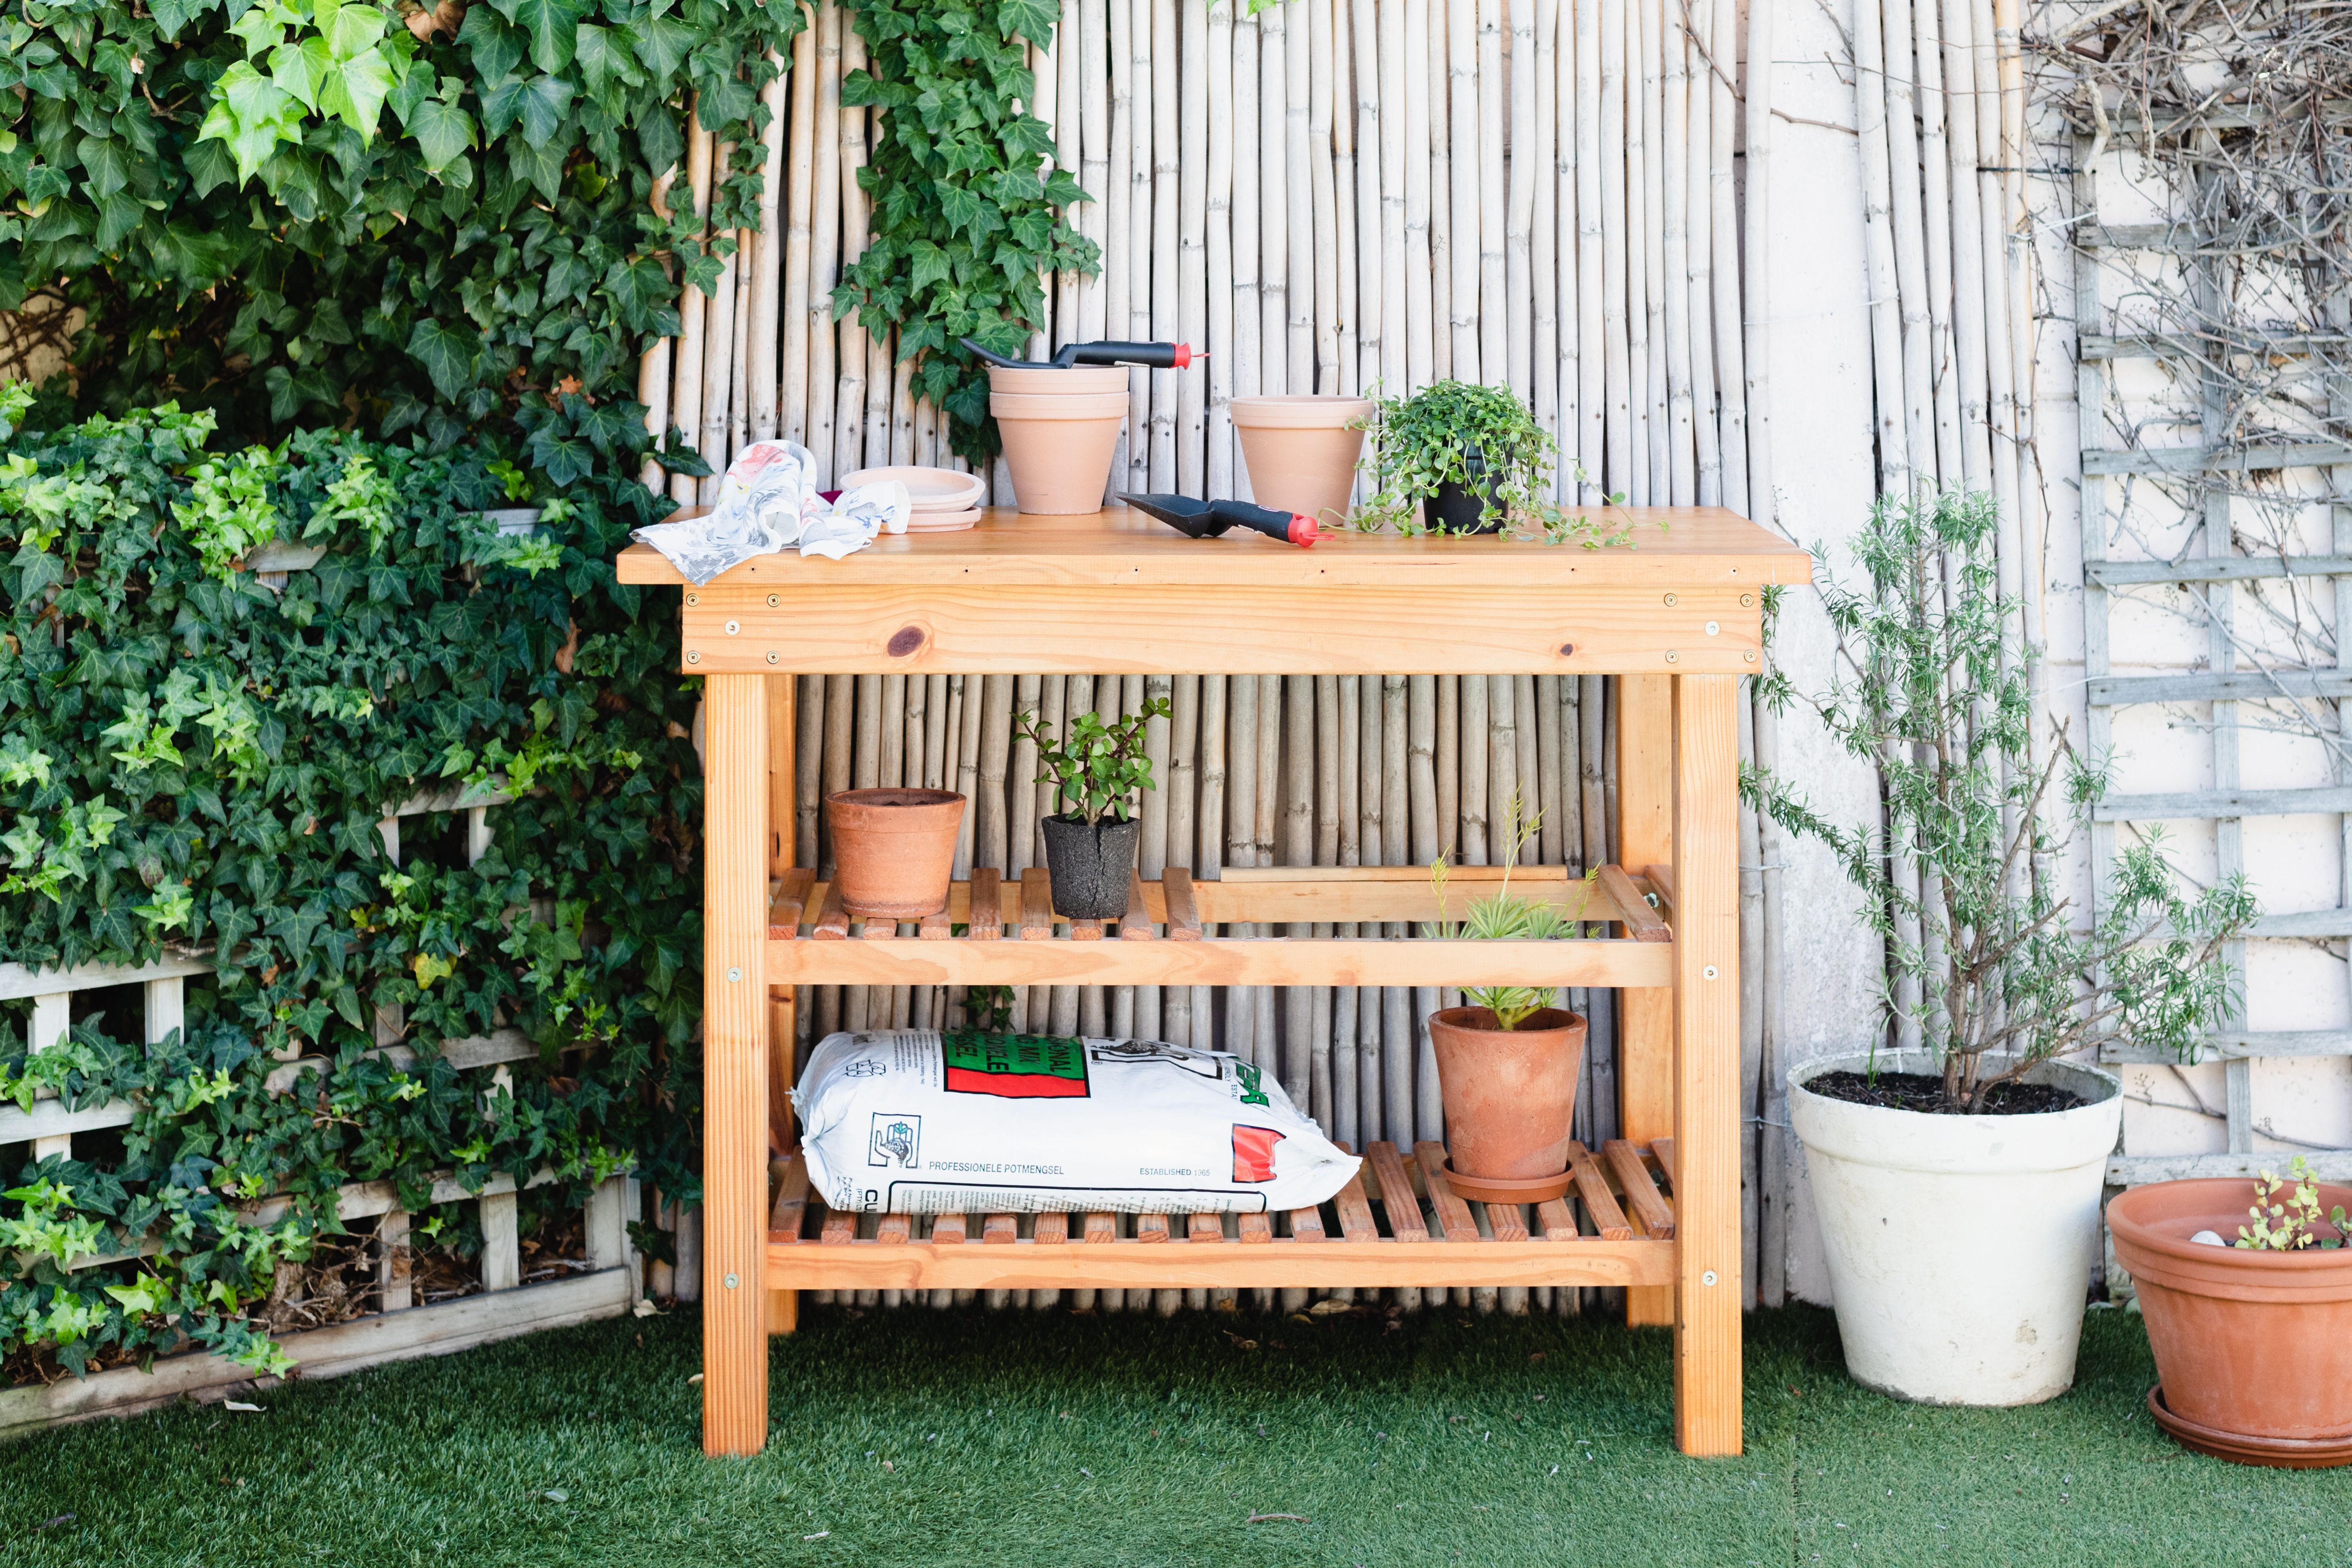 10 Free Potting Bench Plans to Make This Winter